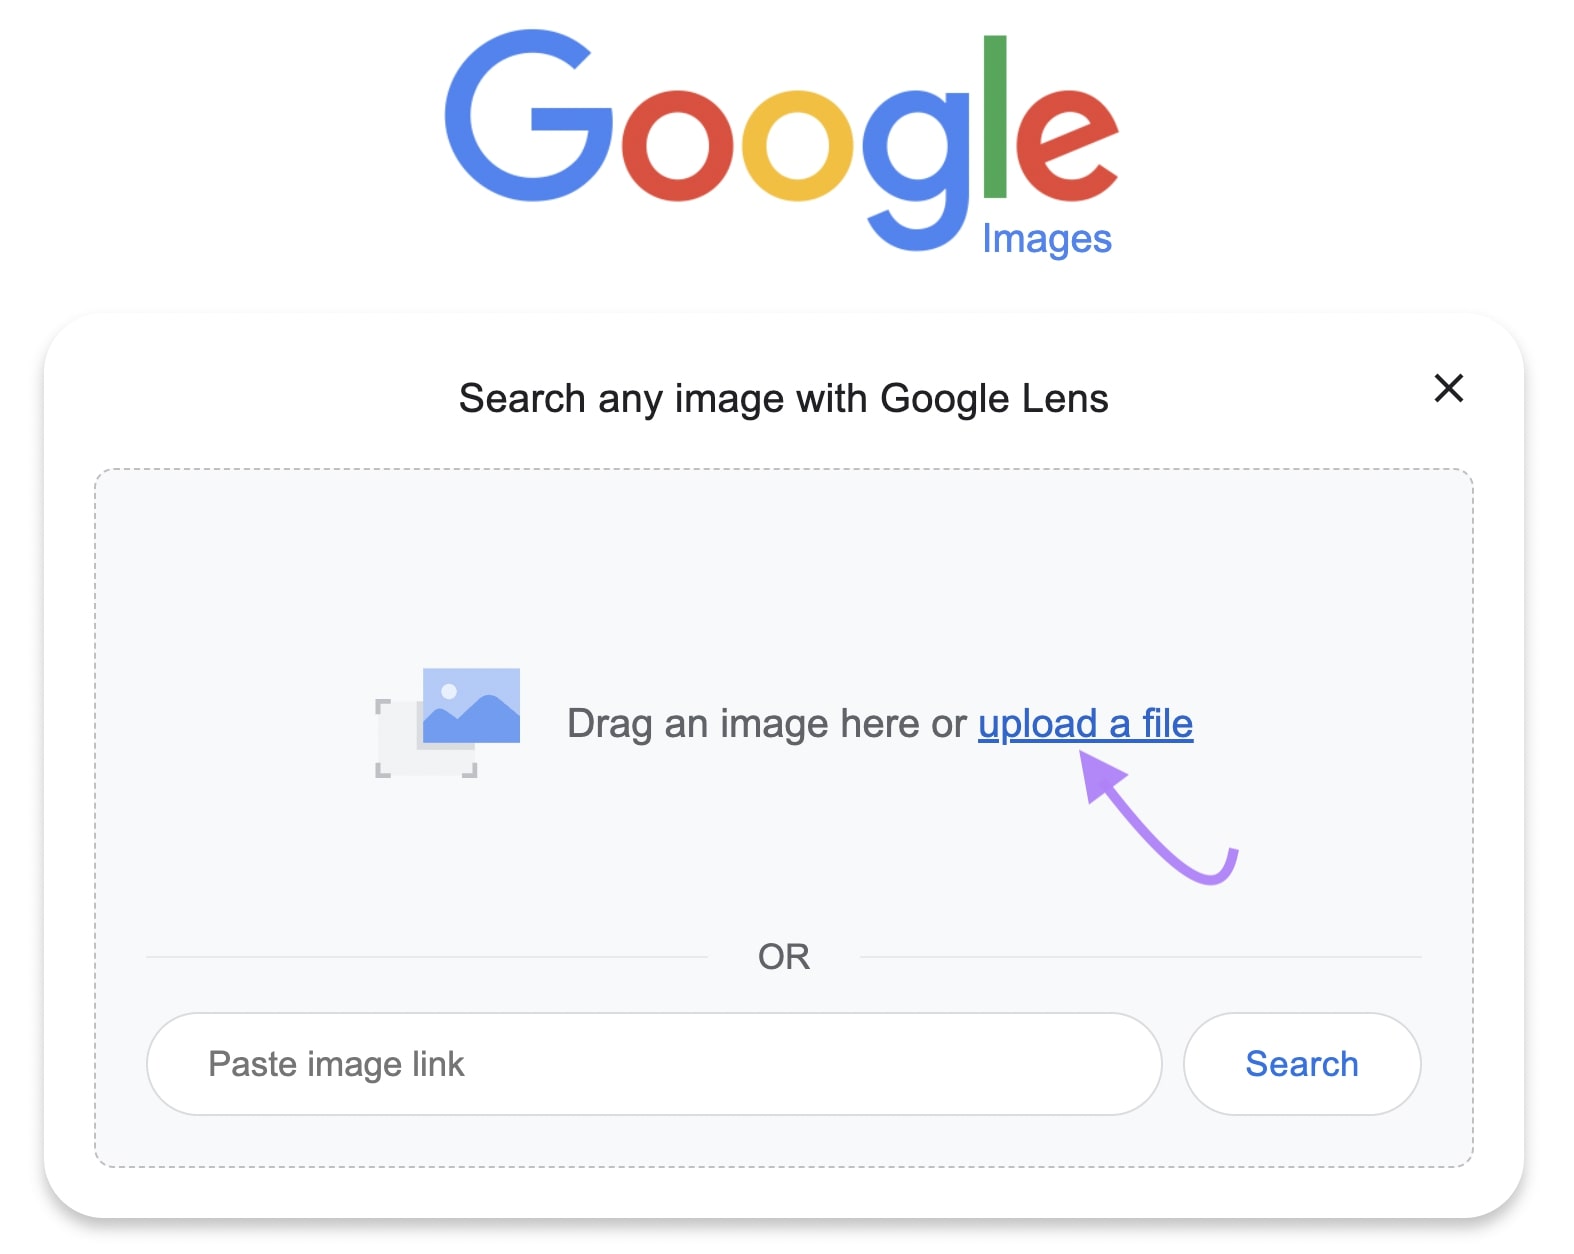 Google Lens image search with 'Upload a file' highlighted